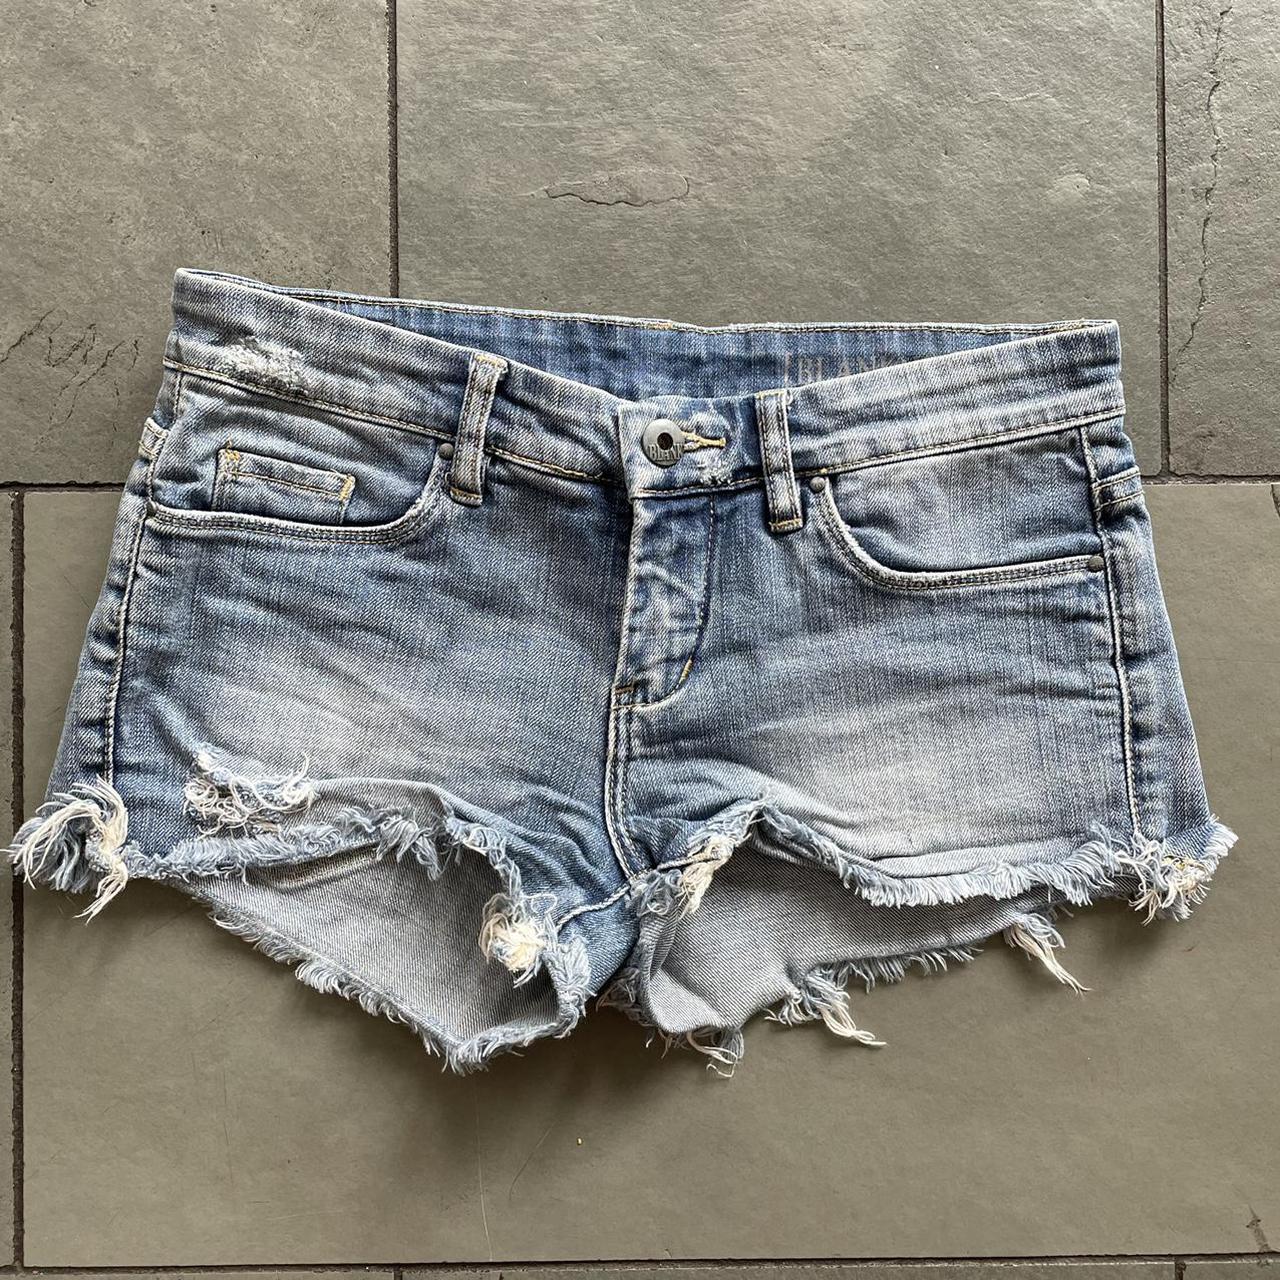 Blank NYC Women's Navy and Blue Shorts | Depop